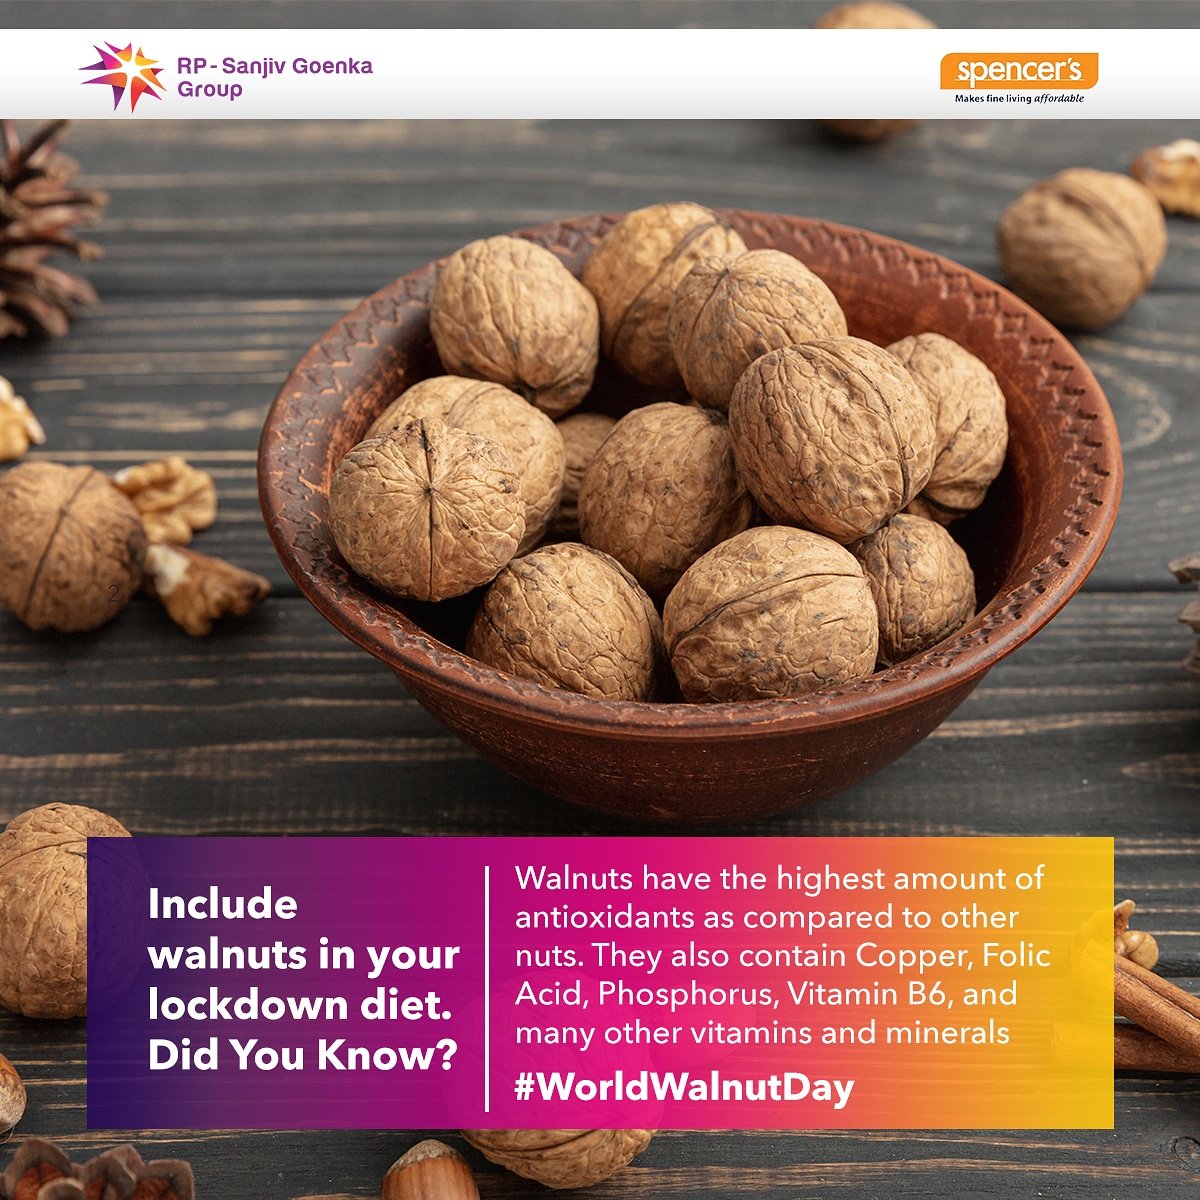 @Spencers_Retail - part of the RPSG family stocks walnuts and a whole variety of nuts and seeds. To include walnut in your lockdown diet, visit a Spencer’s outlet near you. 
#StayHealthy #StaySafe #WorldWalnutDay
#RPSGSpencers #GrowingLegacies